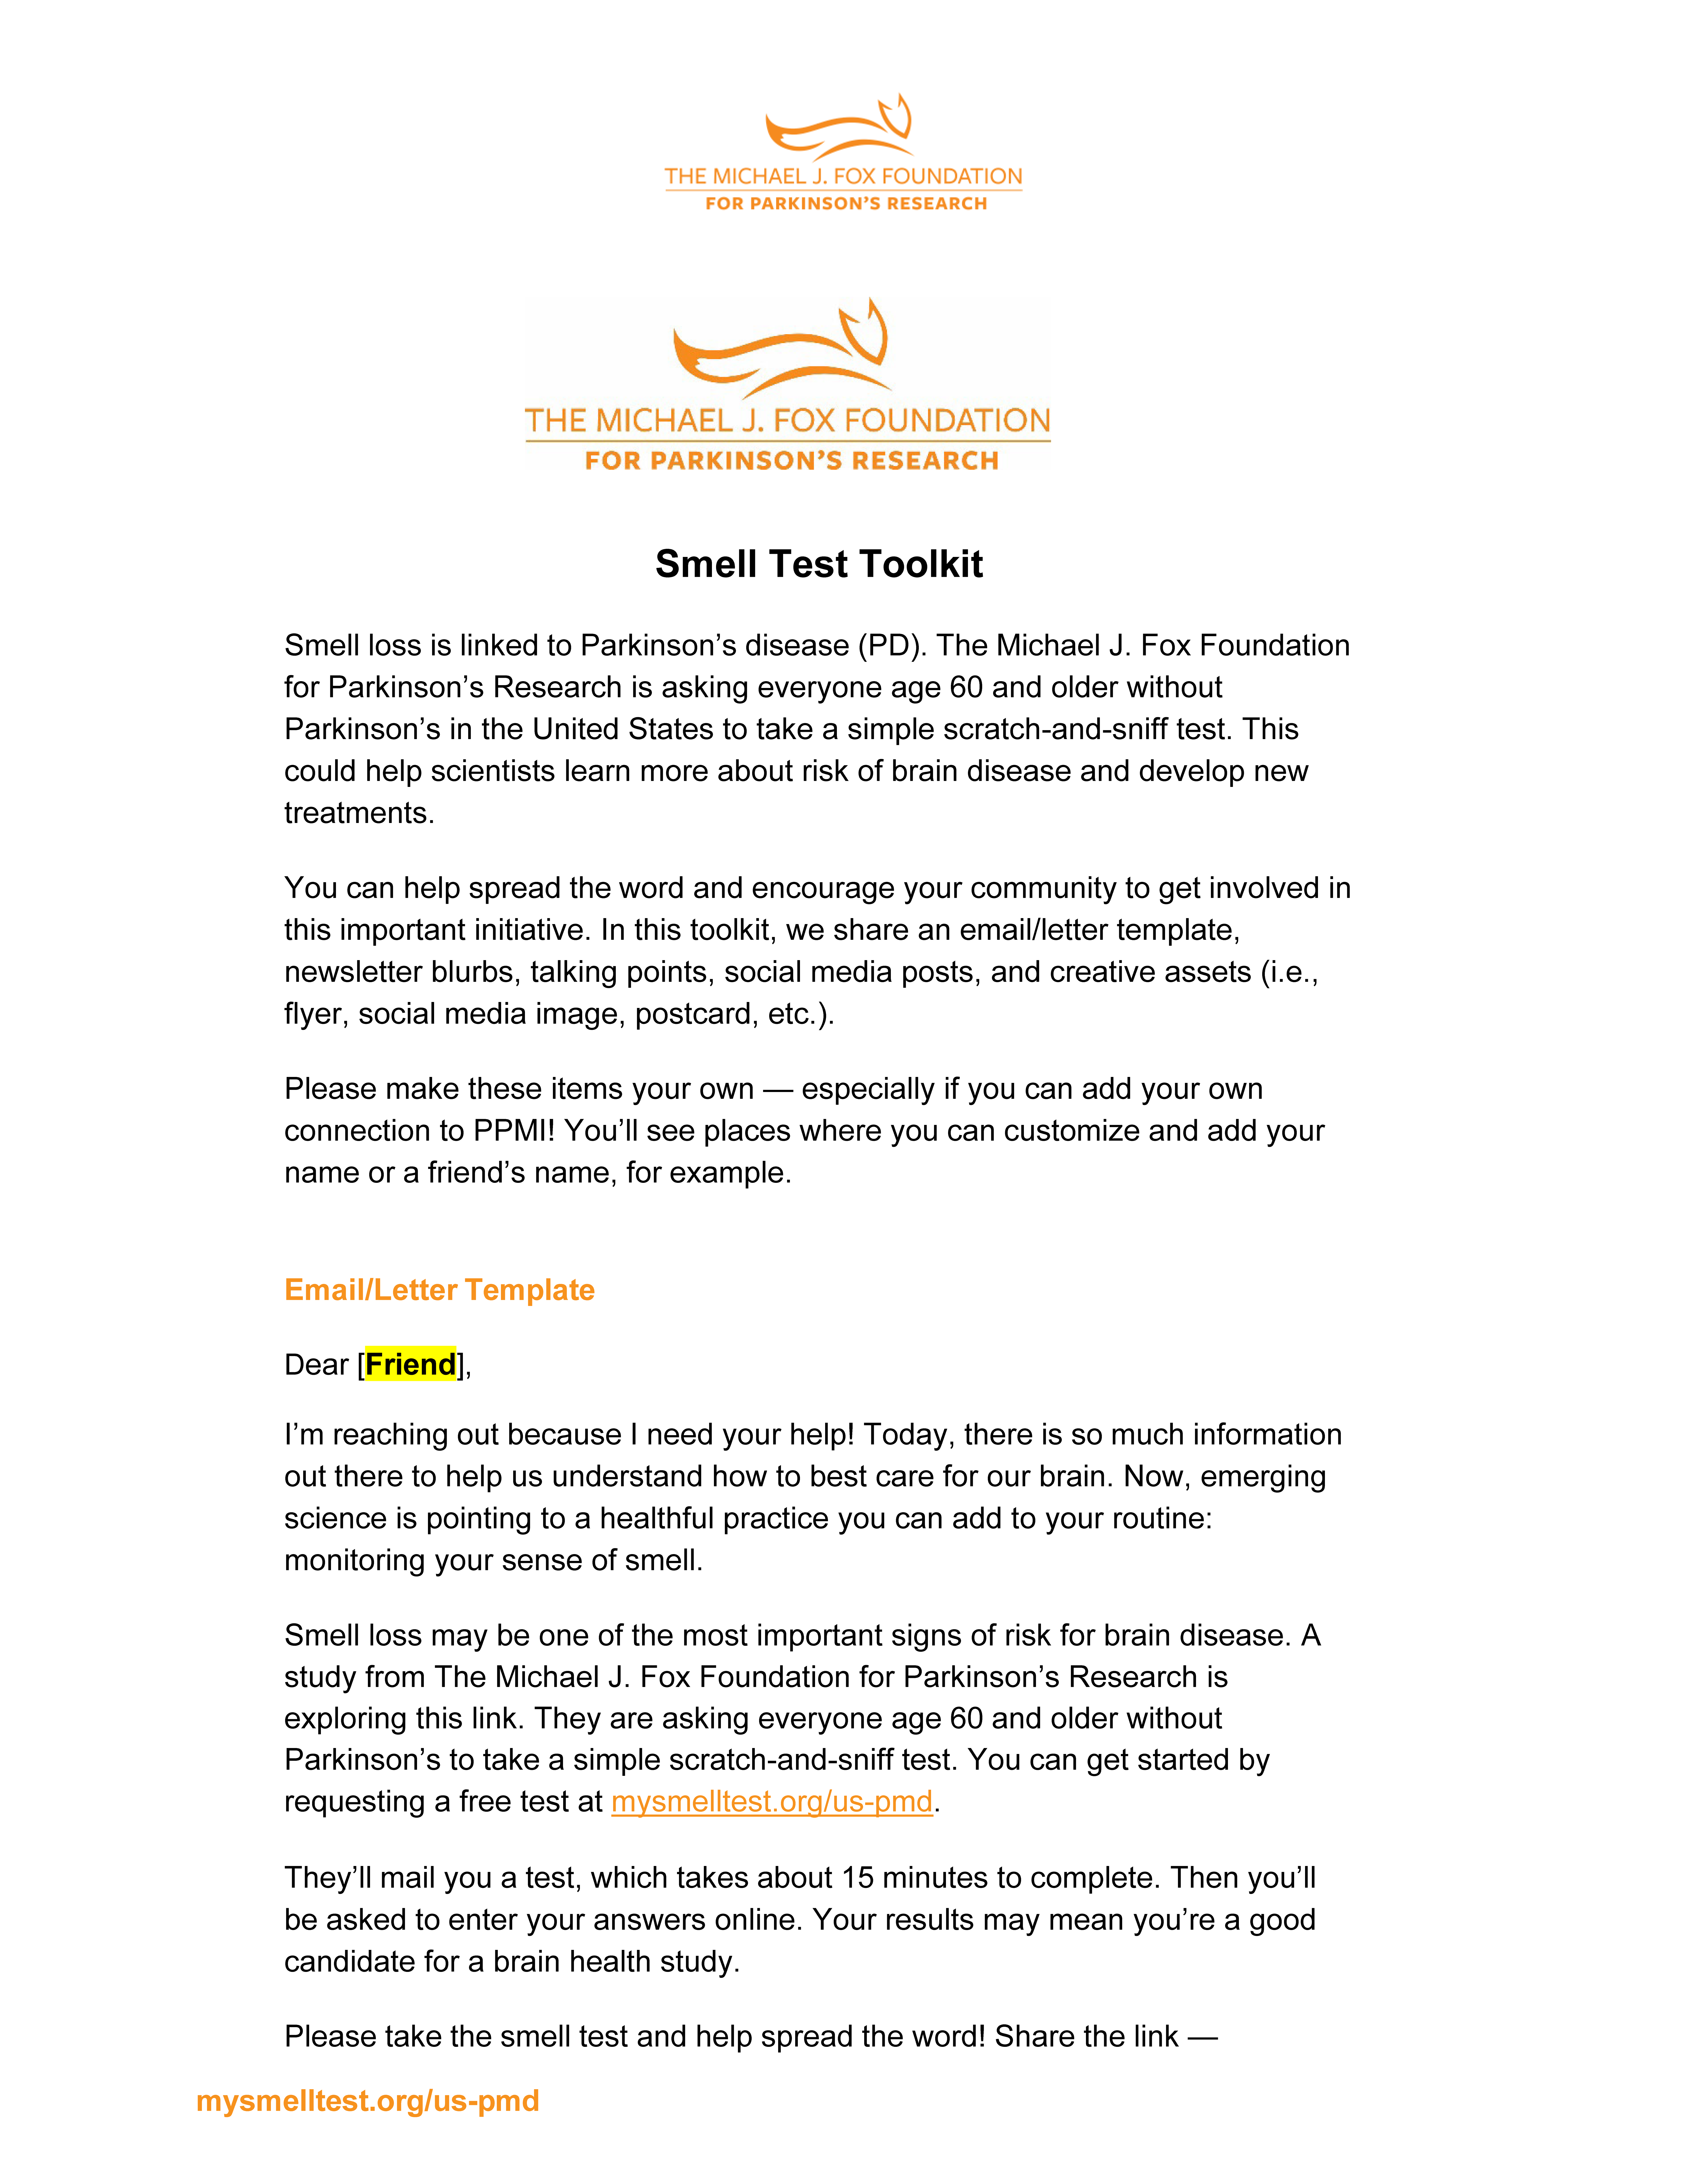 Smell Test Toolkit 12.2.22